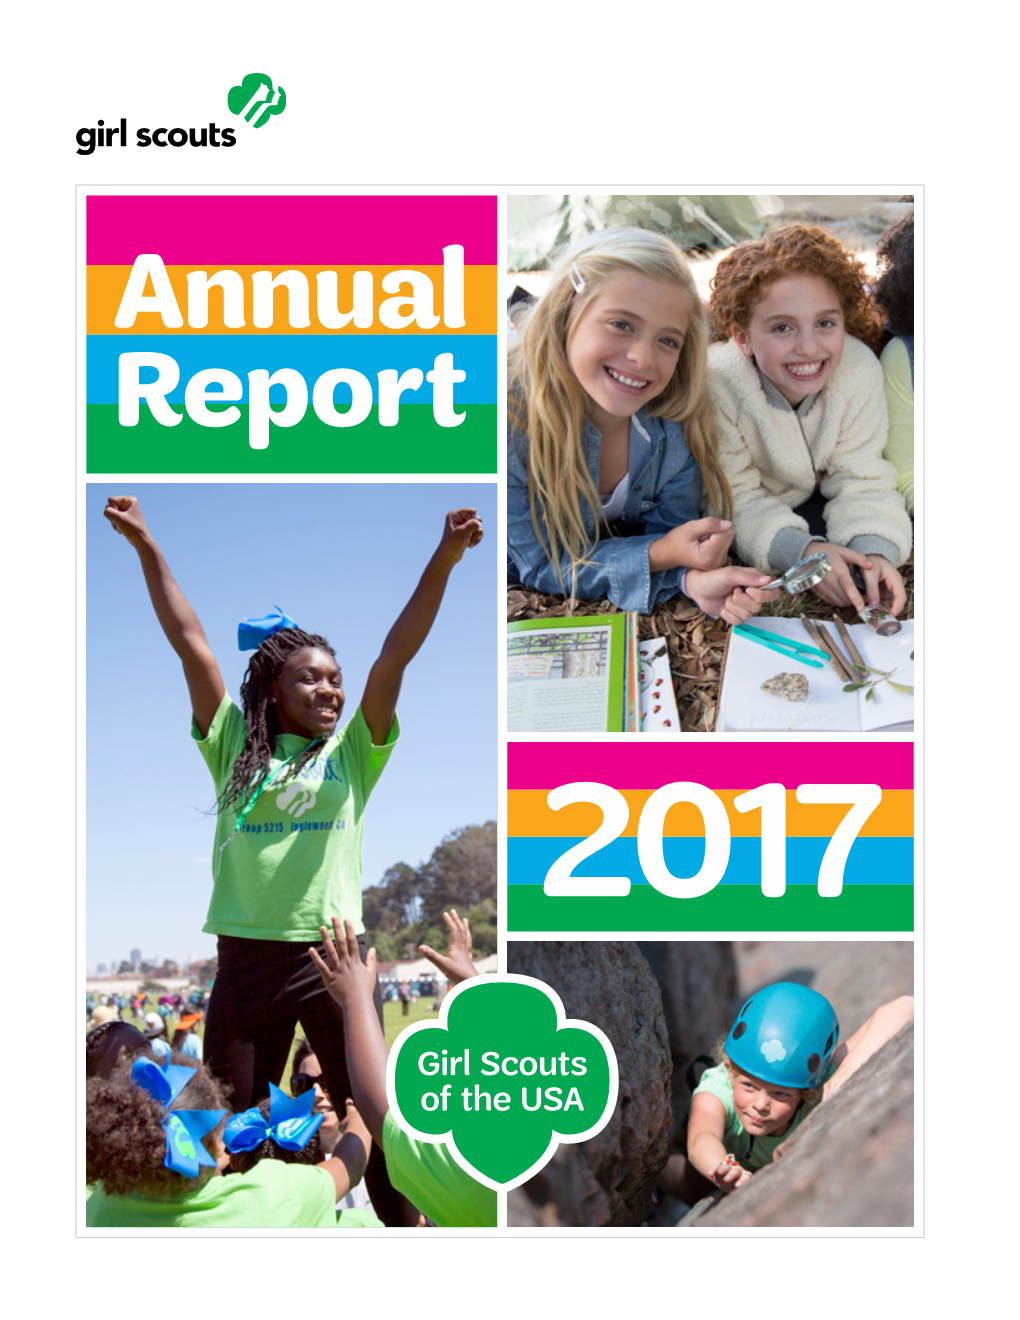 The GSUSA 2017 Annual Report